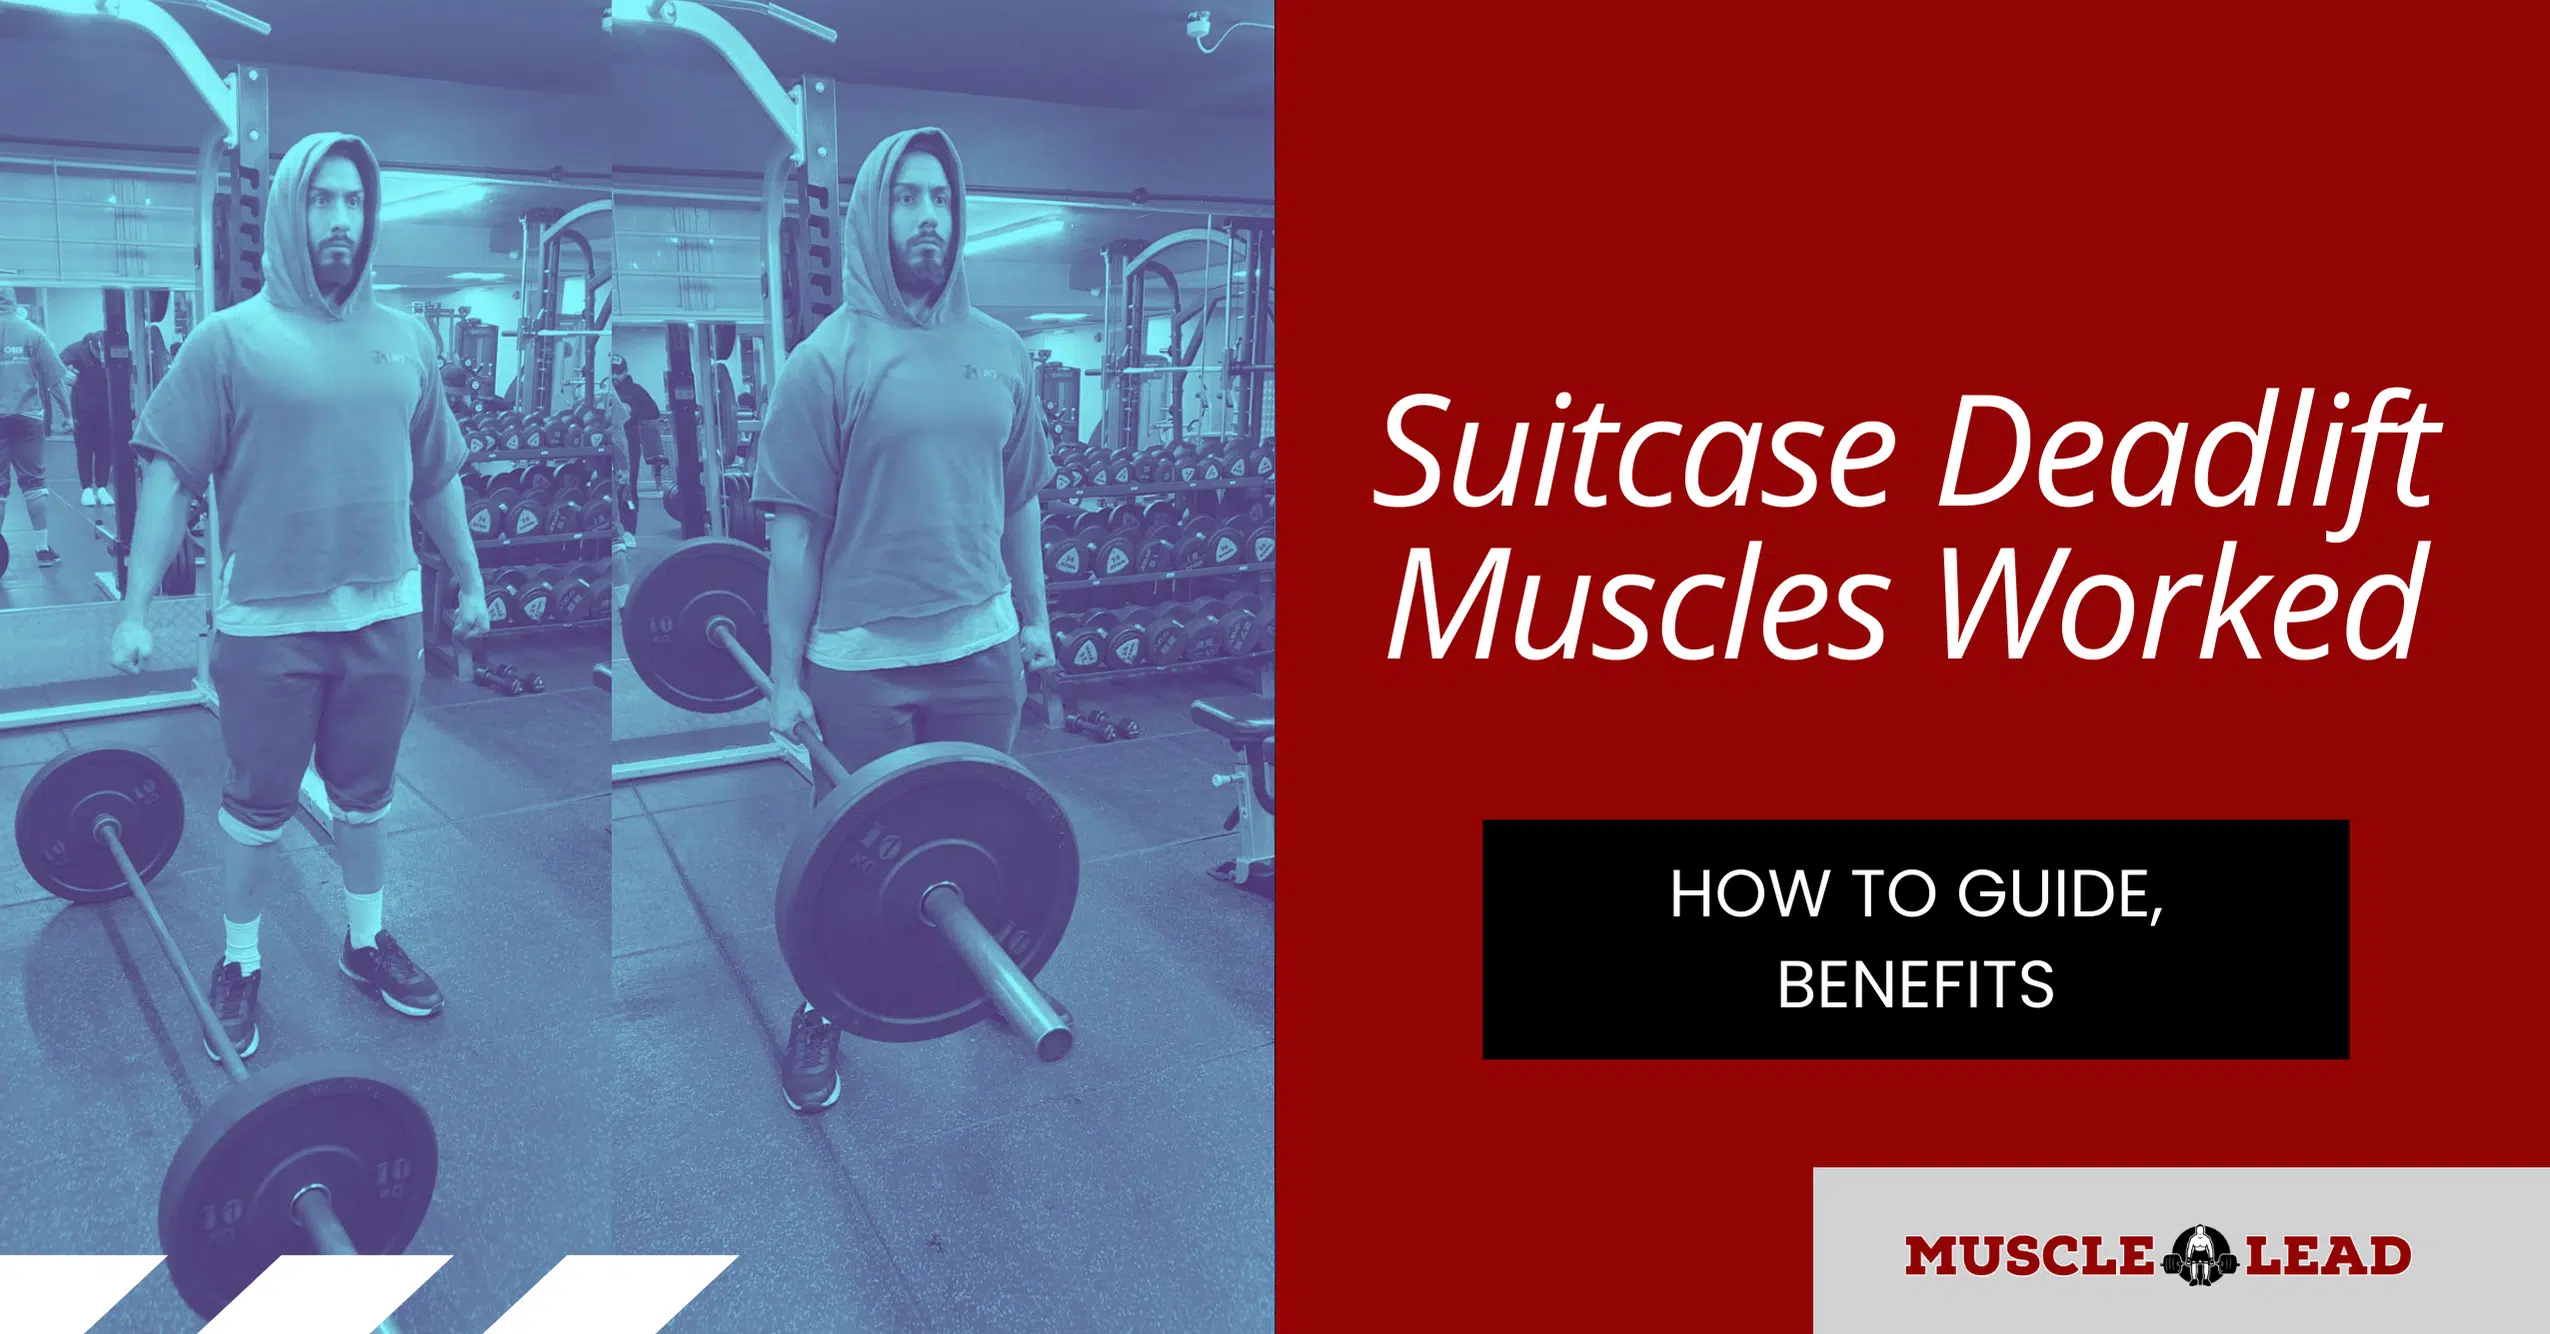 Suitcase Deadlift Muscles Worked How to Guide, Benefits